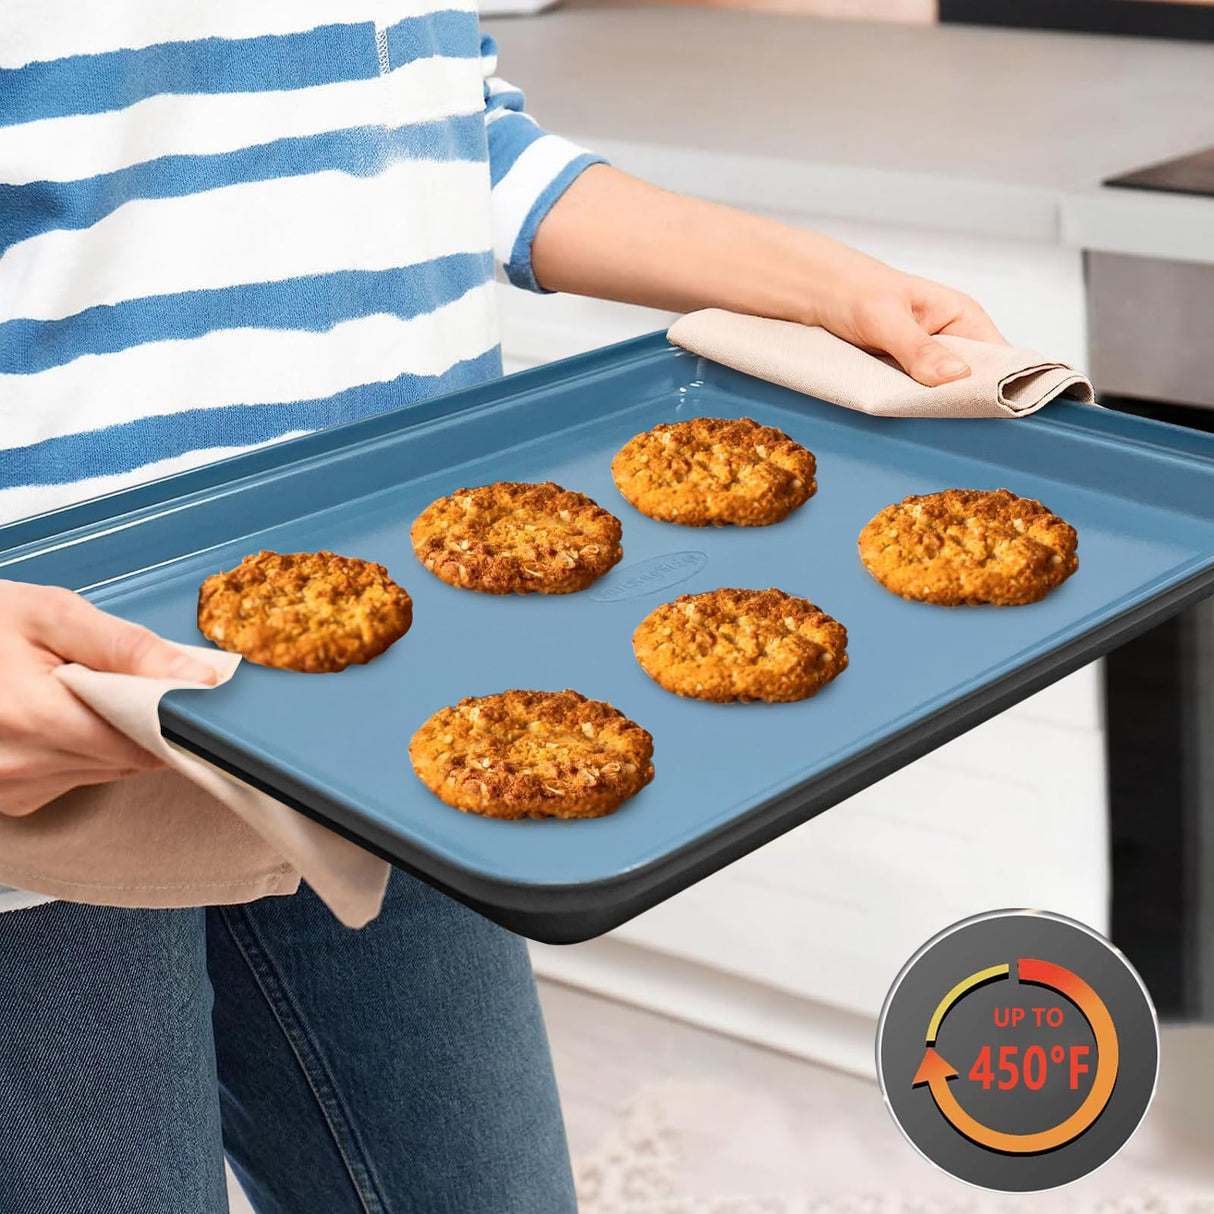 RavisingRidge Baking Pans Set with Nonstick Coating - UltraThick Professional 8-Piece Bi-Color Pans including Cookie Sheet, Muffin, Cake Pans, and Cooling Rack - Heavy Duty, Dishwasher Safe